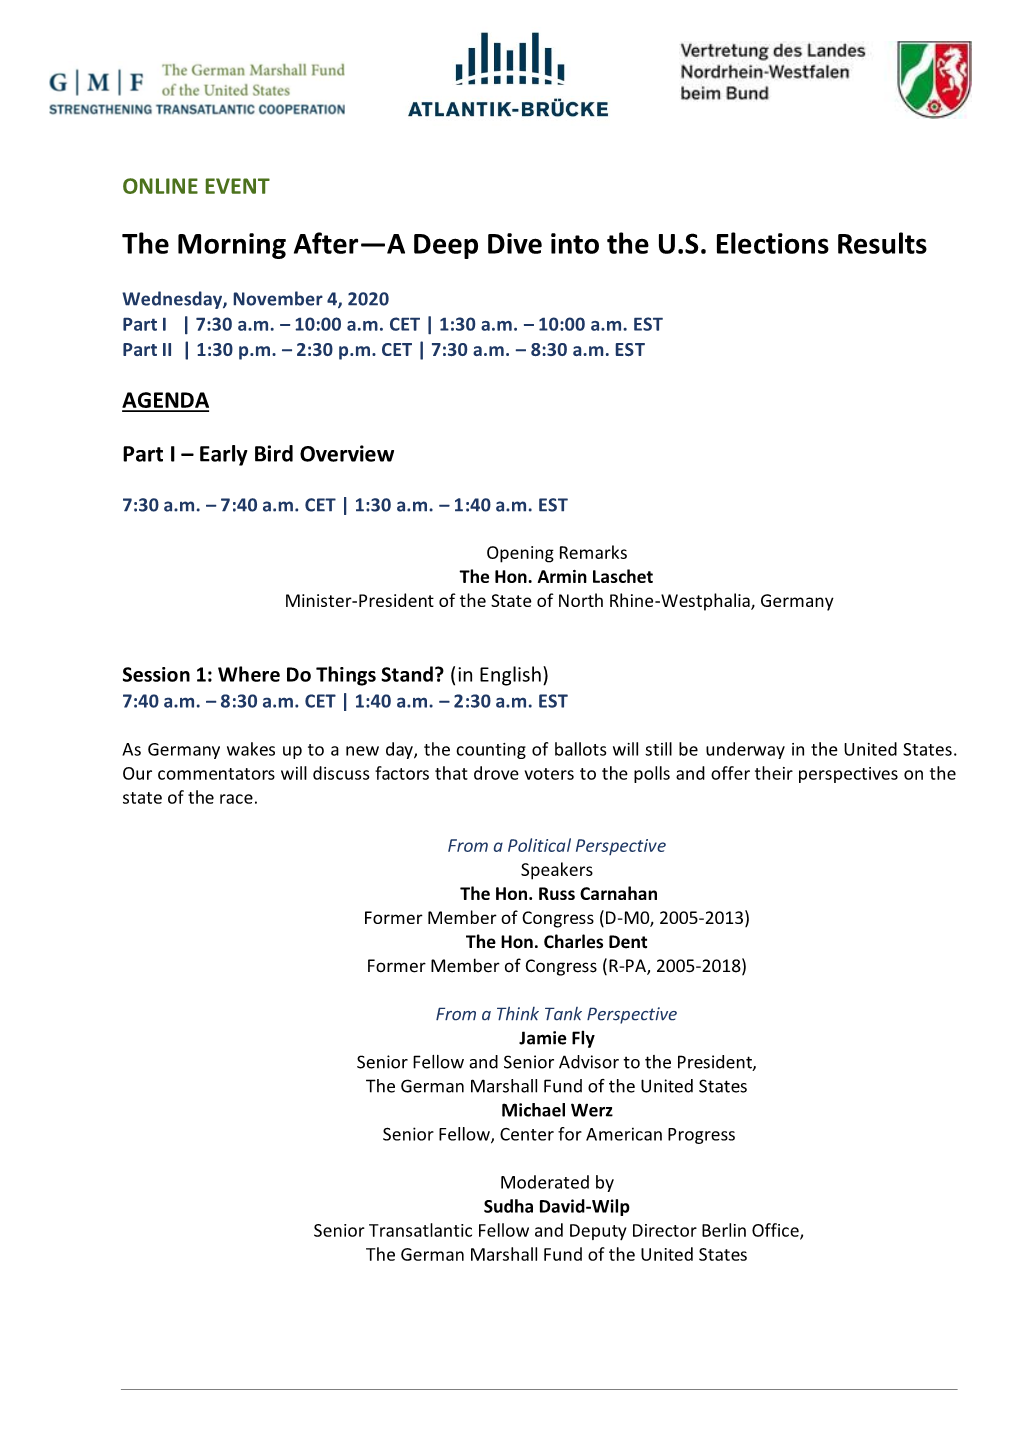 The Morning After—A Deep Dive Into the U.S. Elections Results